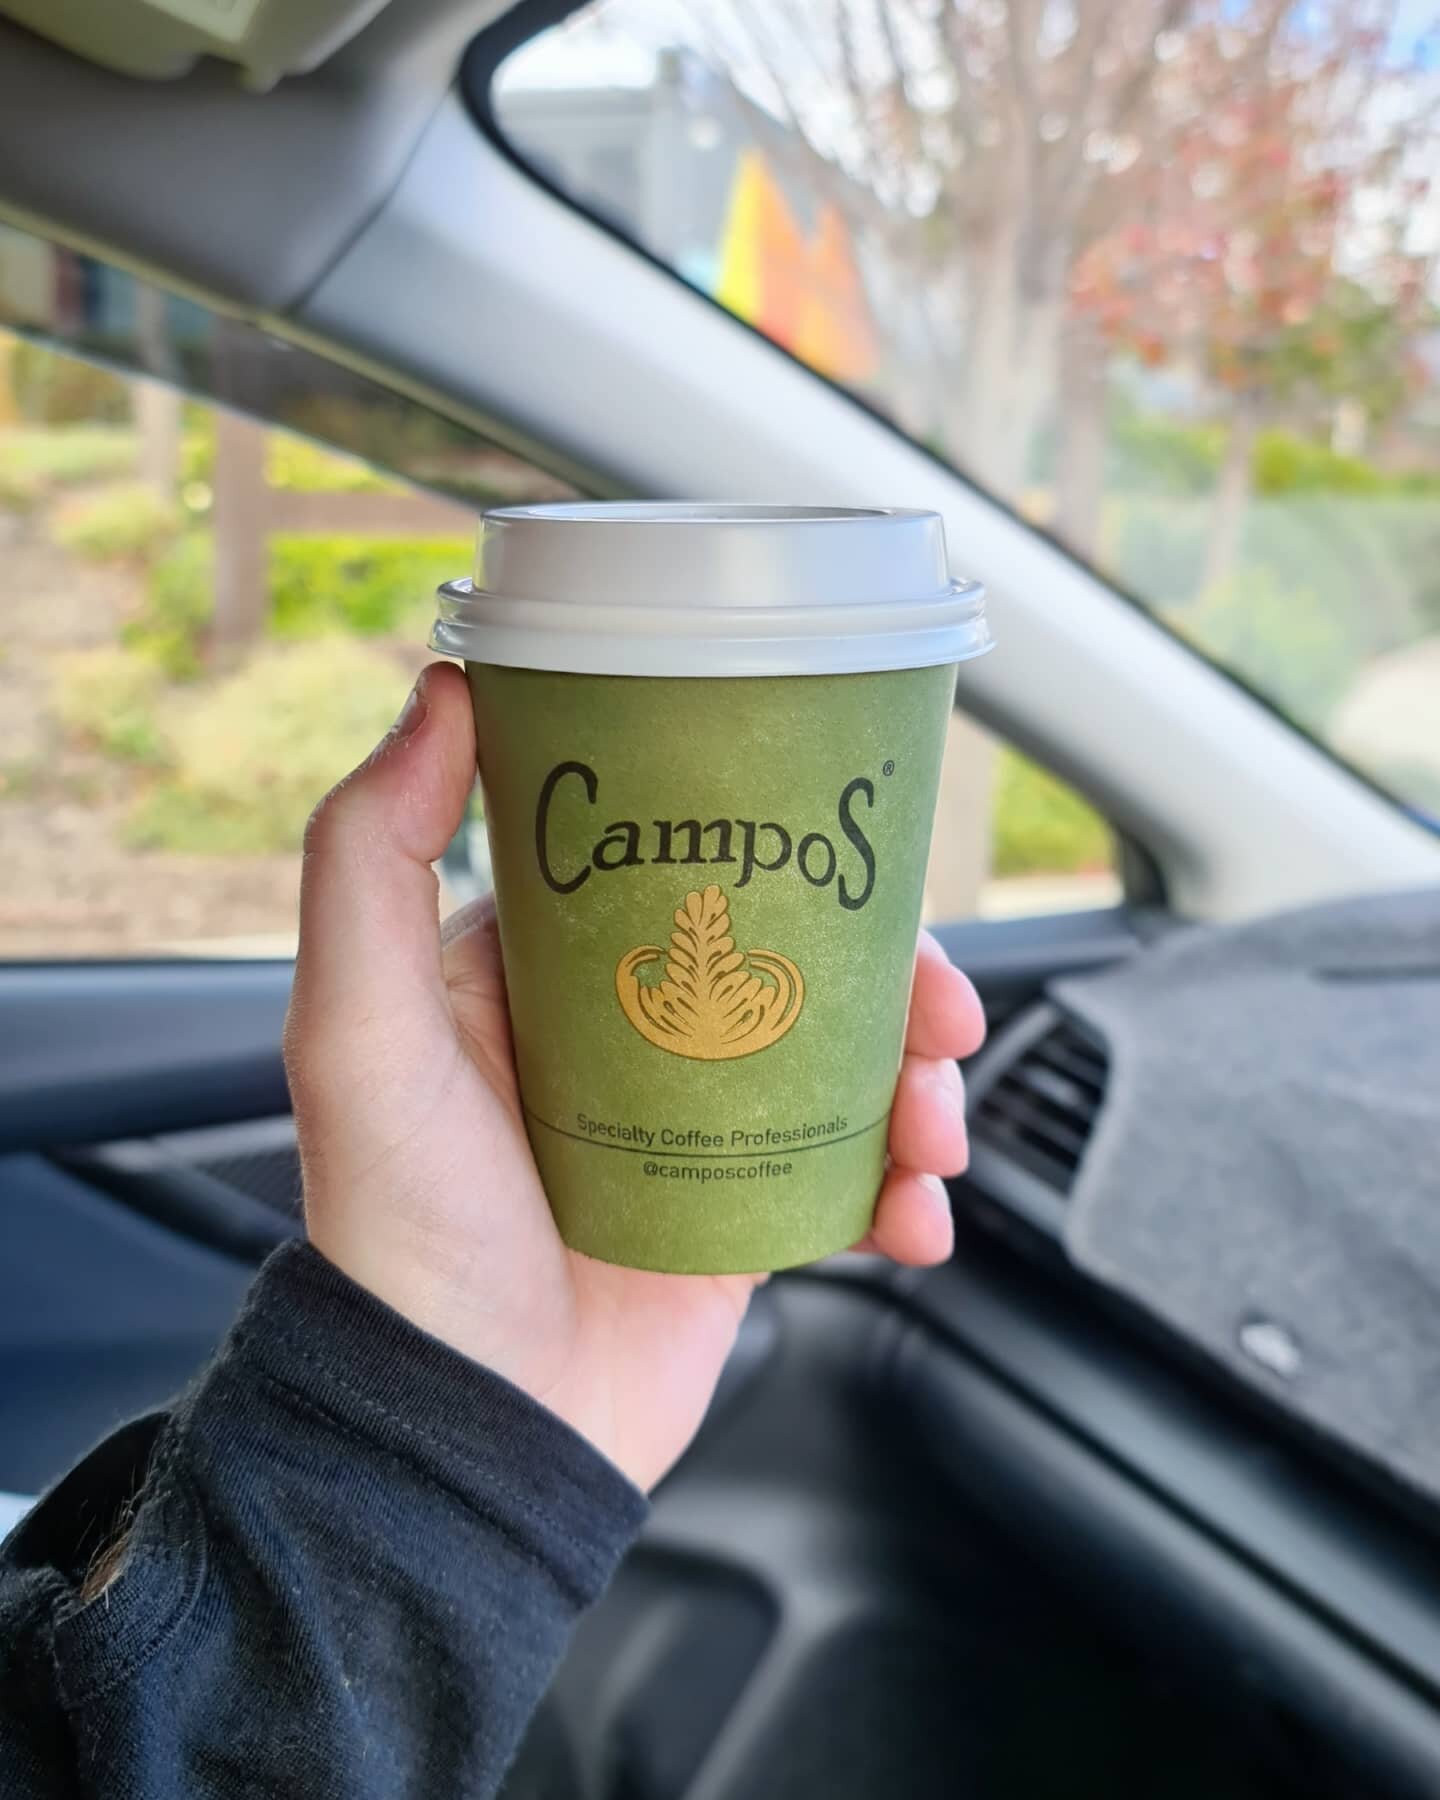 The 2021 version of Dine-In coffee

Just happens to be in a takeaway cup, in a car, on your own

Despite all the doom &amp; gloom, we're lucky to have such a wonderful community who look out for each other

Thanks for letting us be part of your day ?